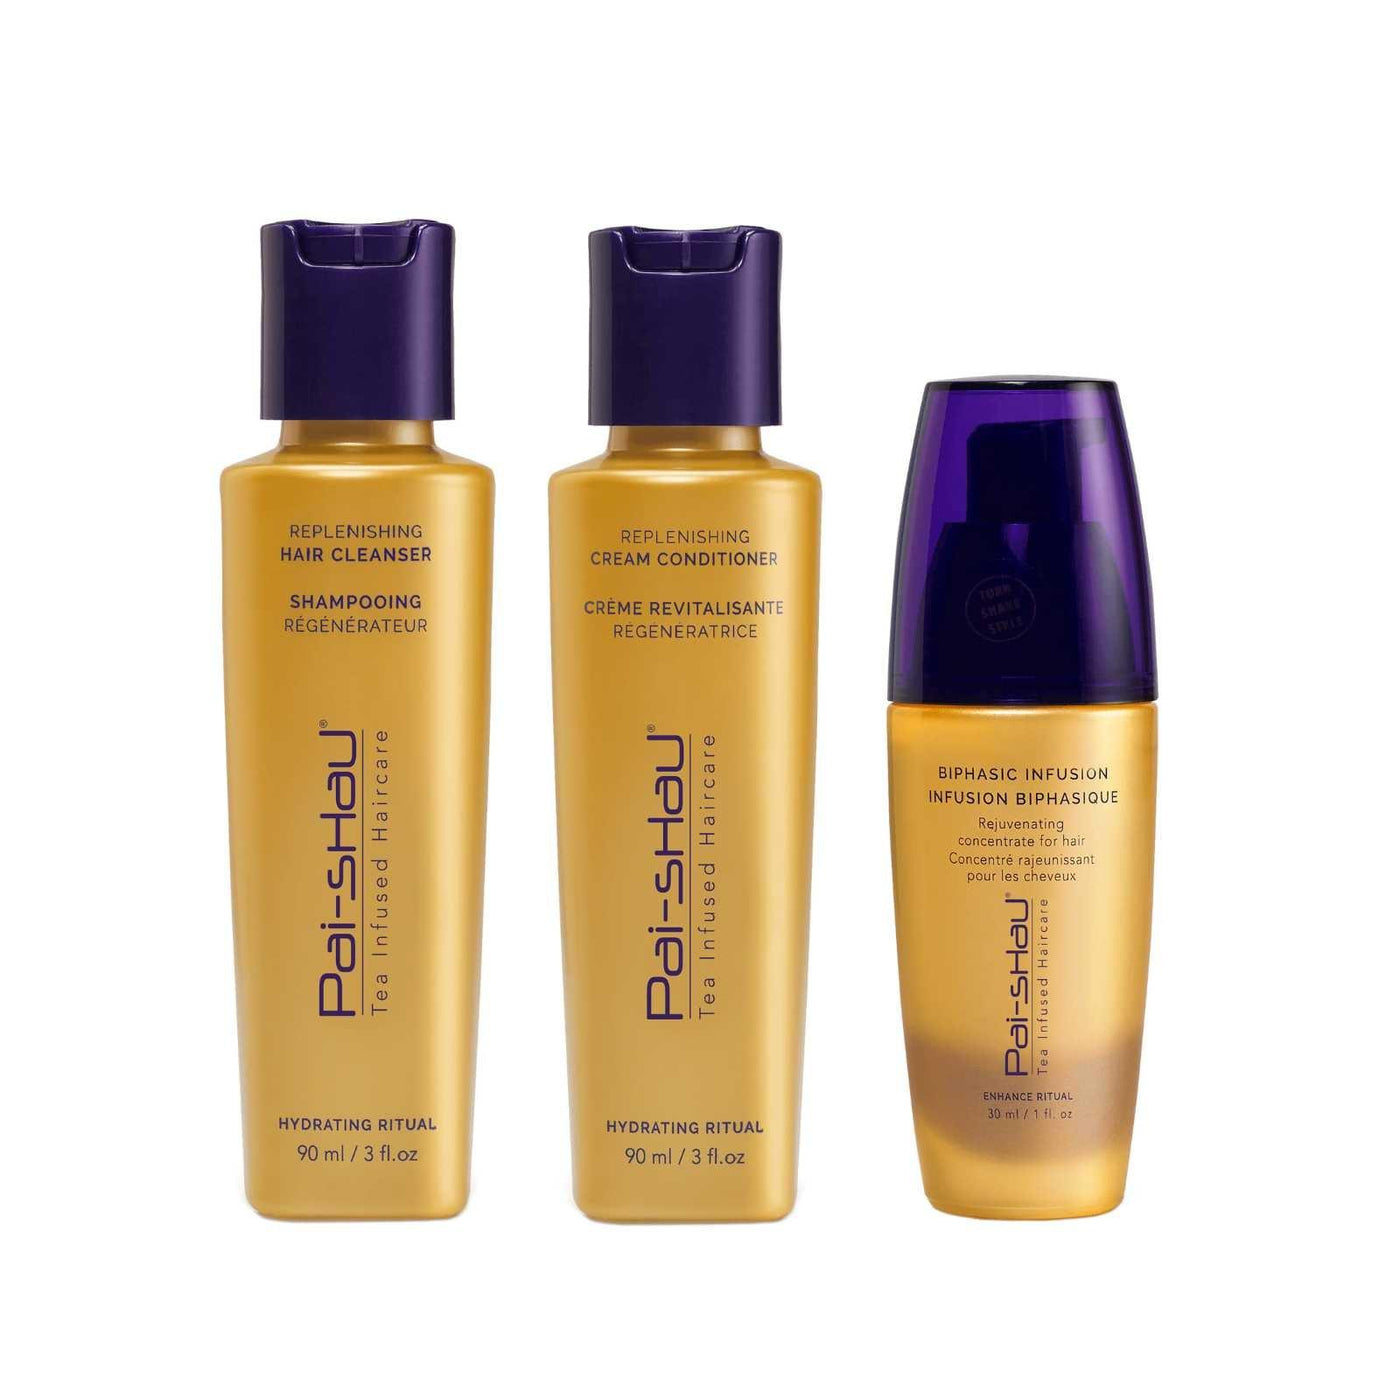 Hydrating Ritual Collection Travel Routeane Pai-Shau Boutique Deauville